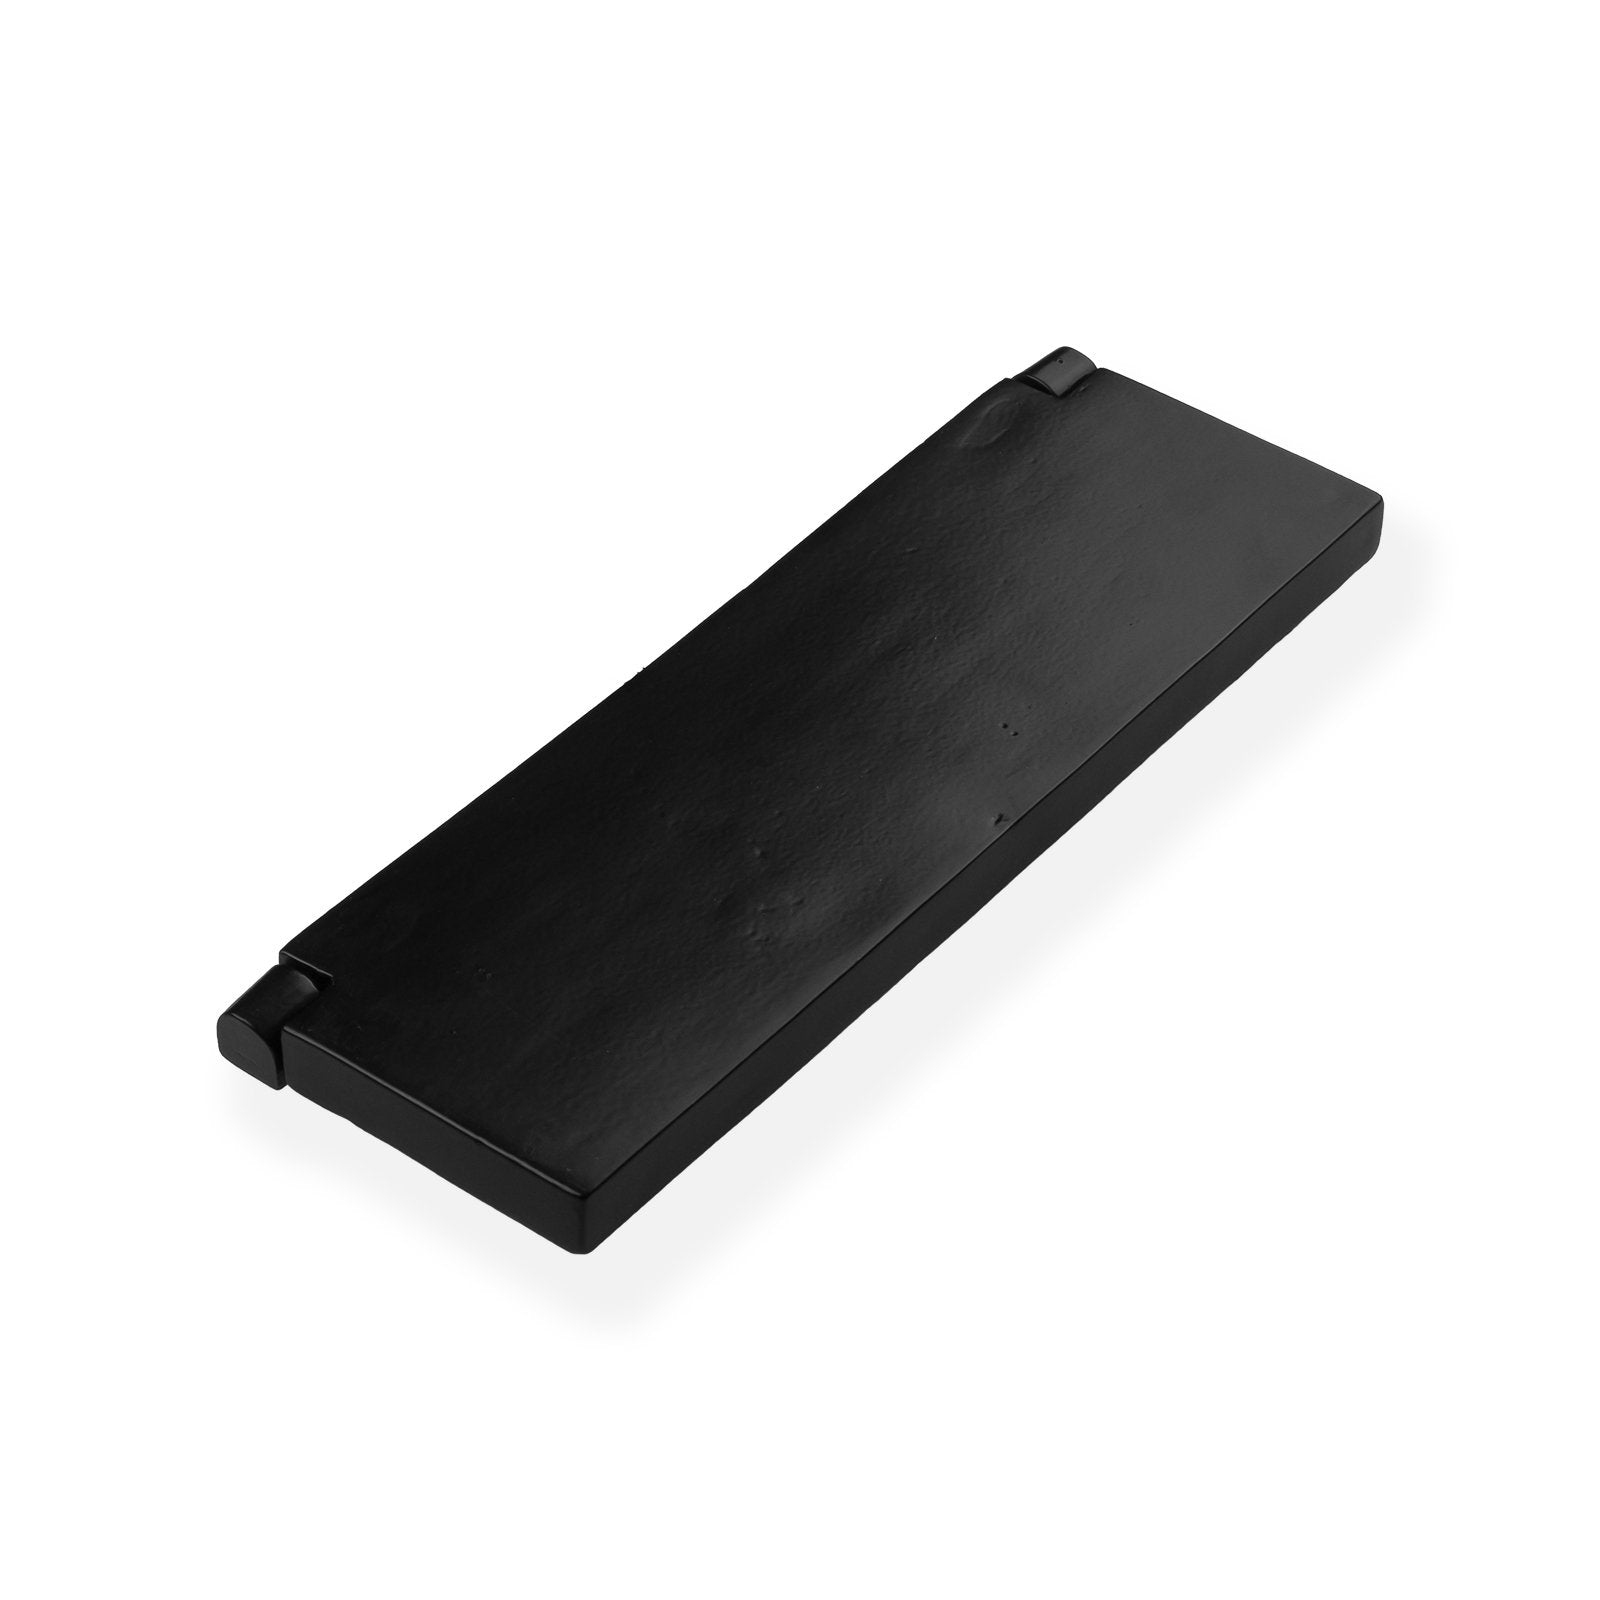 Letter box cover, specifically 10.5 inch Interior Letter Plate Tidy Black Cast Iron